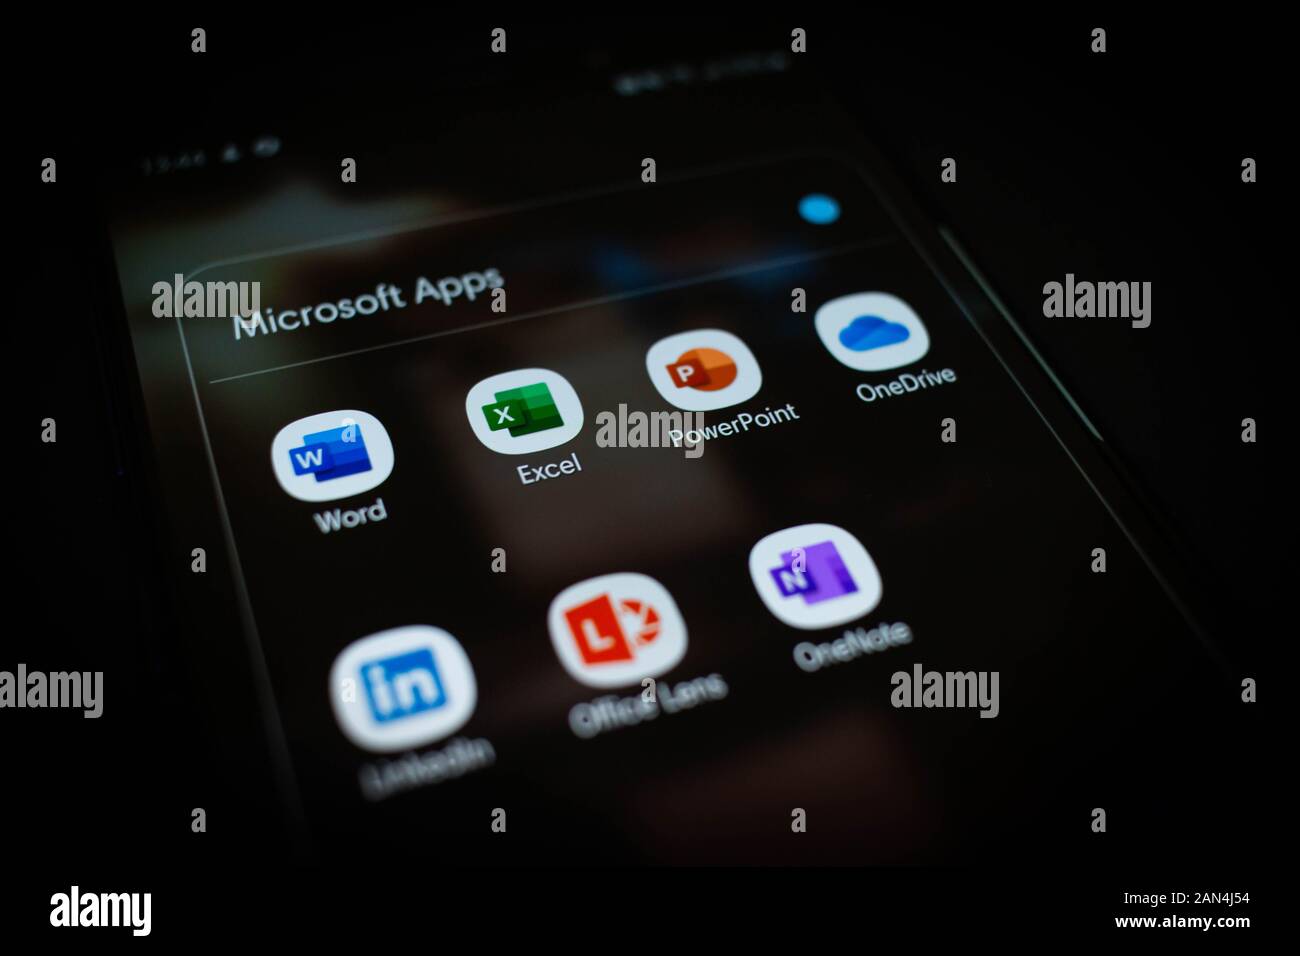 Picture of Microsoft Office 365 for Android (MS Word, Excel, PowerPoint,  OneDrive, Lens, OneNote) and LinkedIn Stock Photo - Alamy